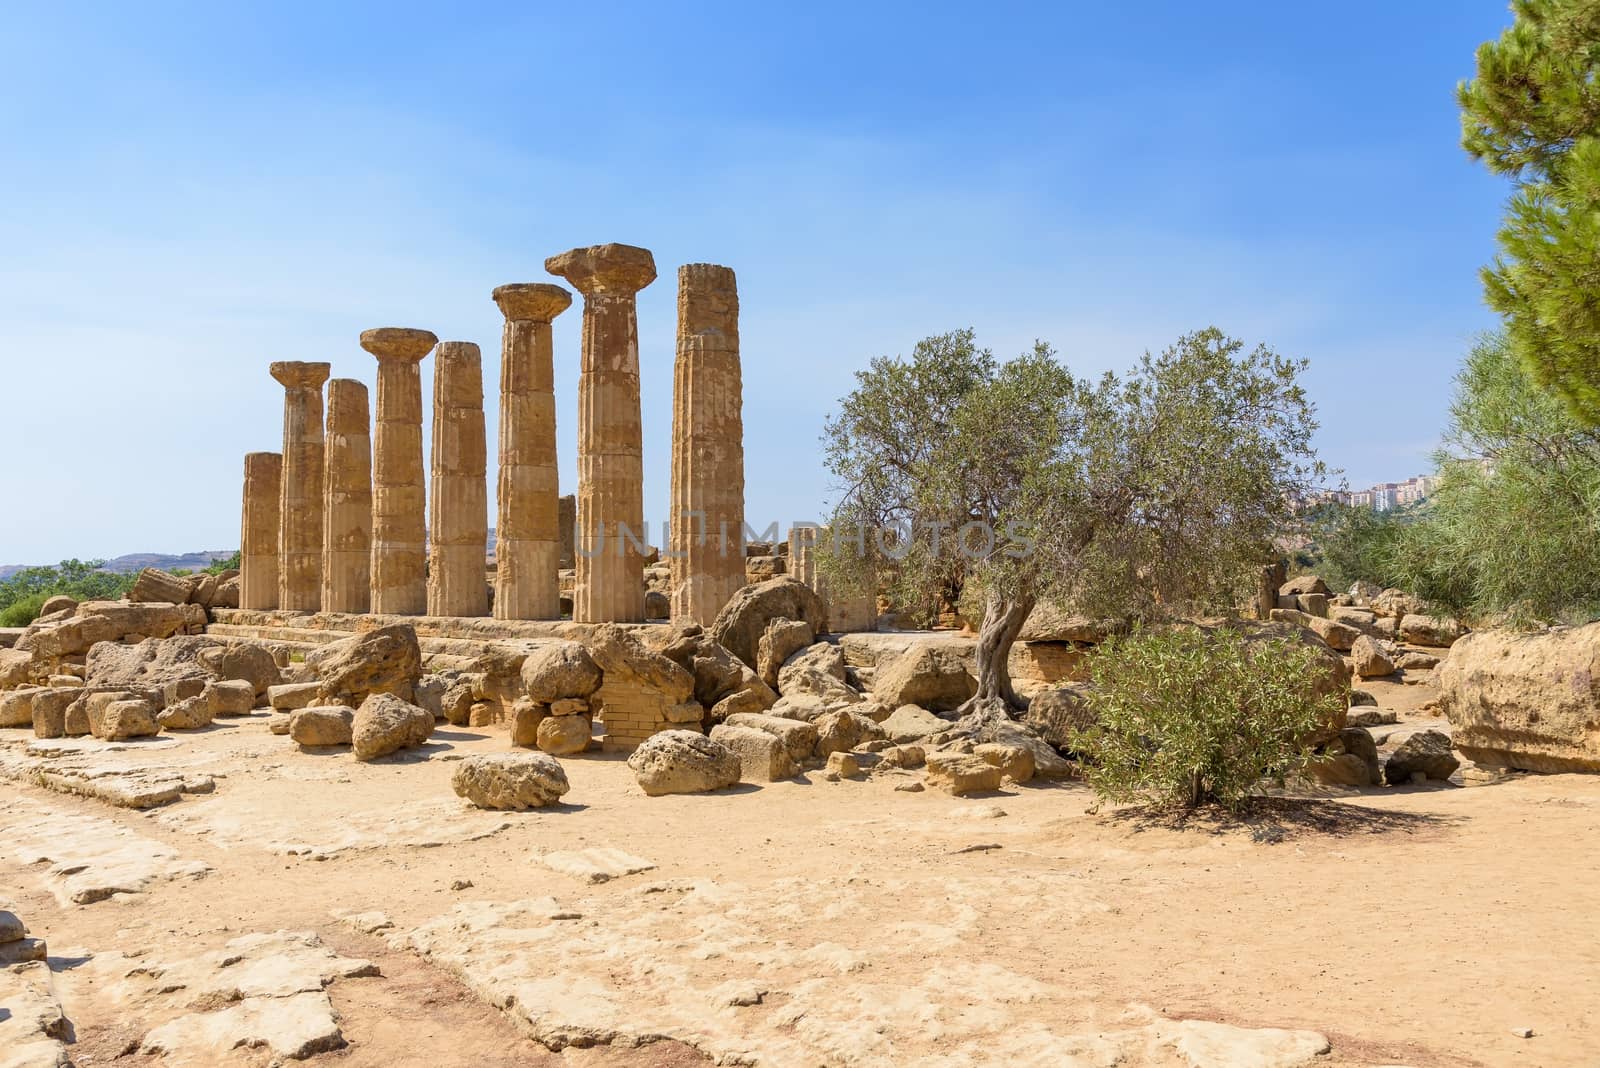 Ruins of th Temple of Hercules in the Valley of the Temples in Agrigento, Sicily, Italy